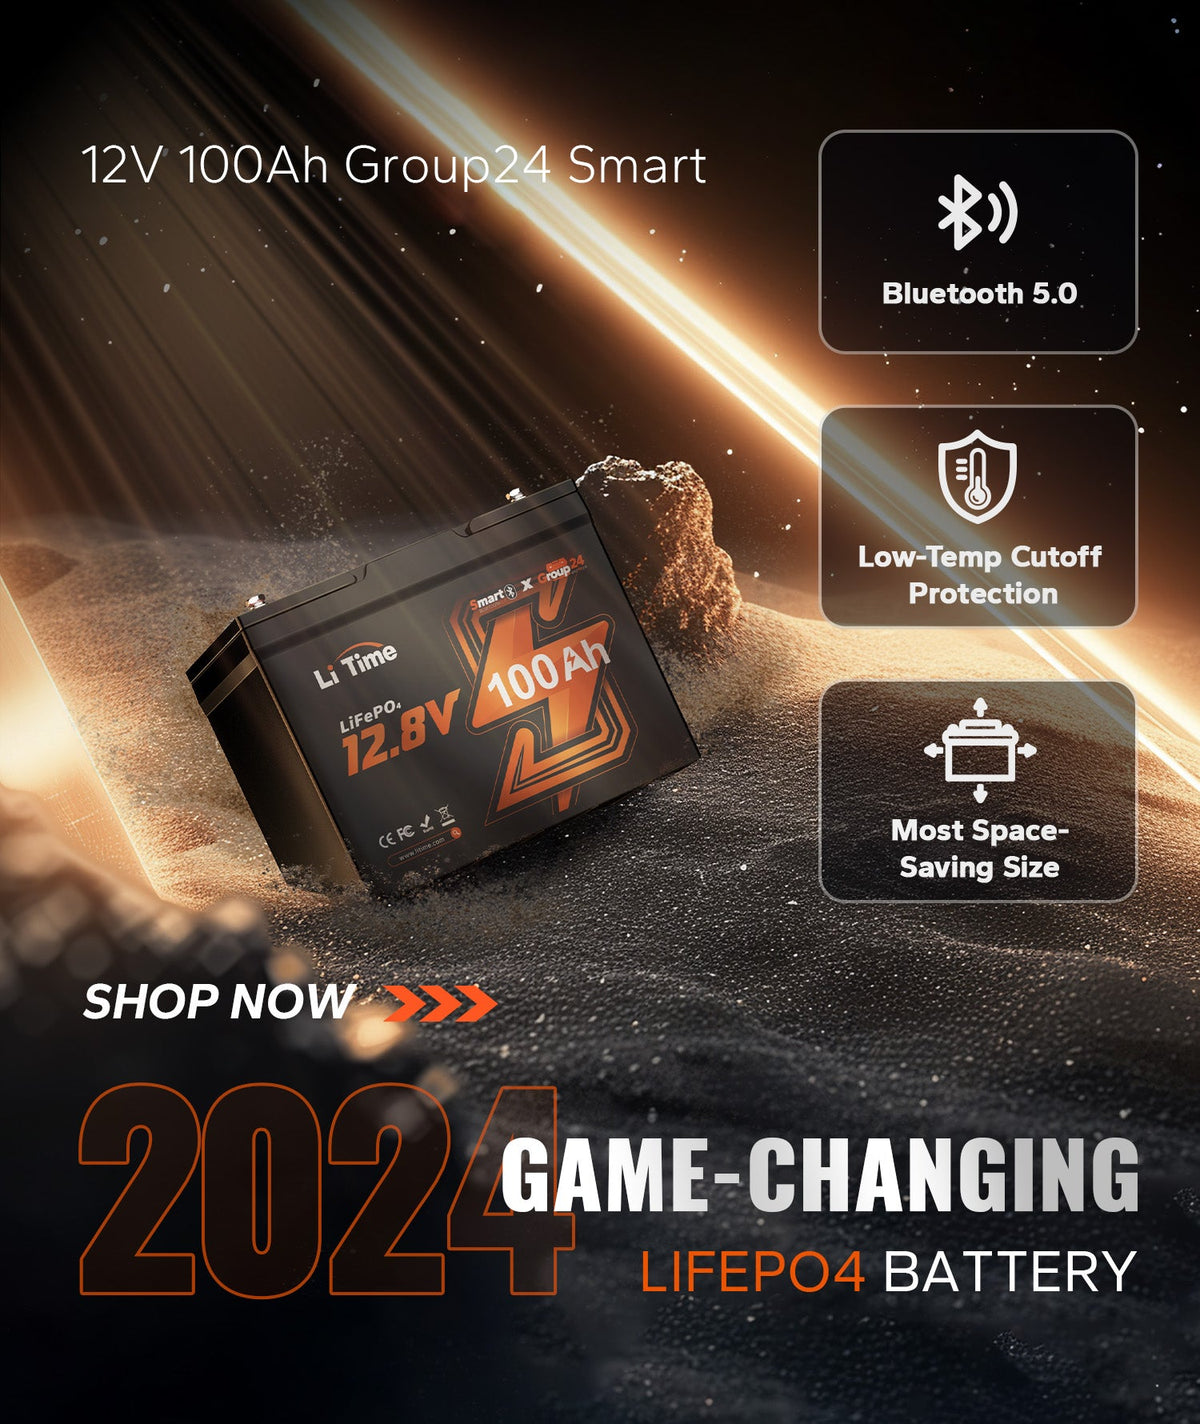 🔥Game-Changing 12V 100Ah Group 24 Bluetooth LiFePO4 Battery: $100 OFF  Launch Price for a Limited Time Only! - Ampere Time